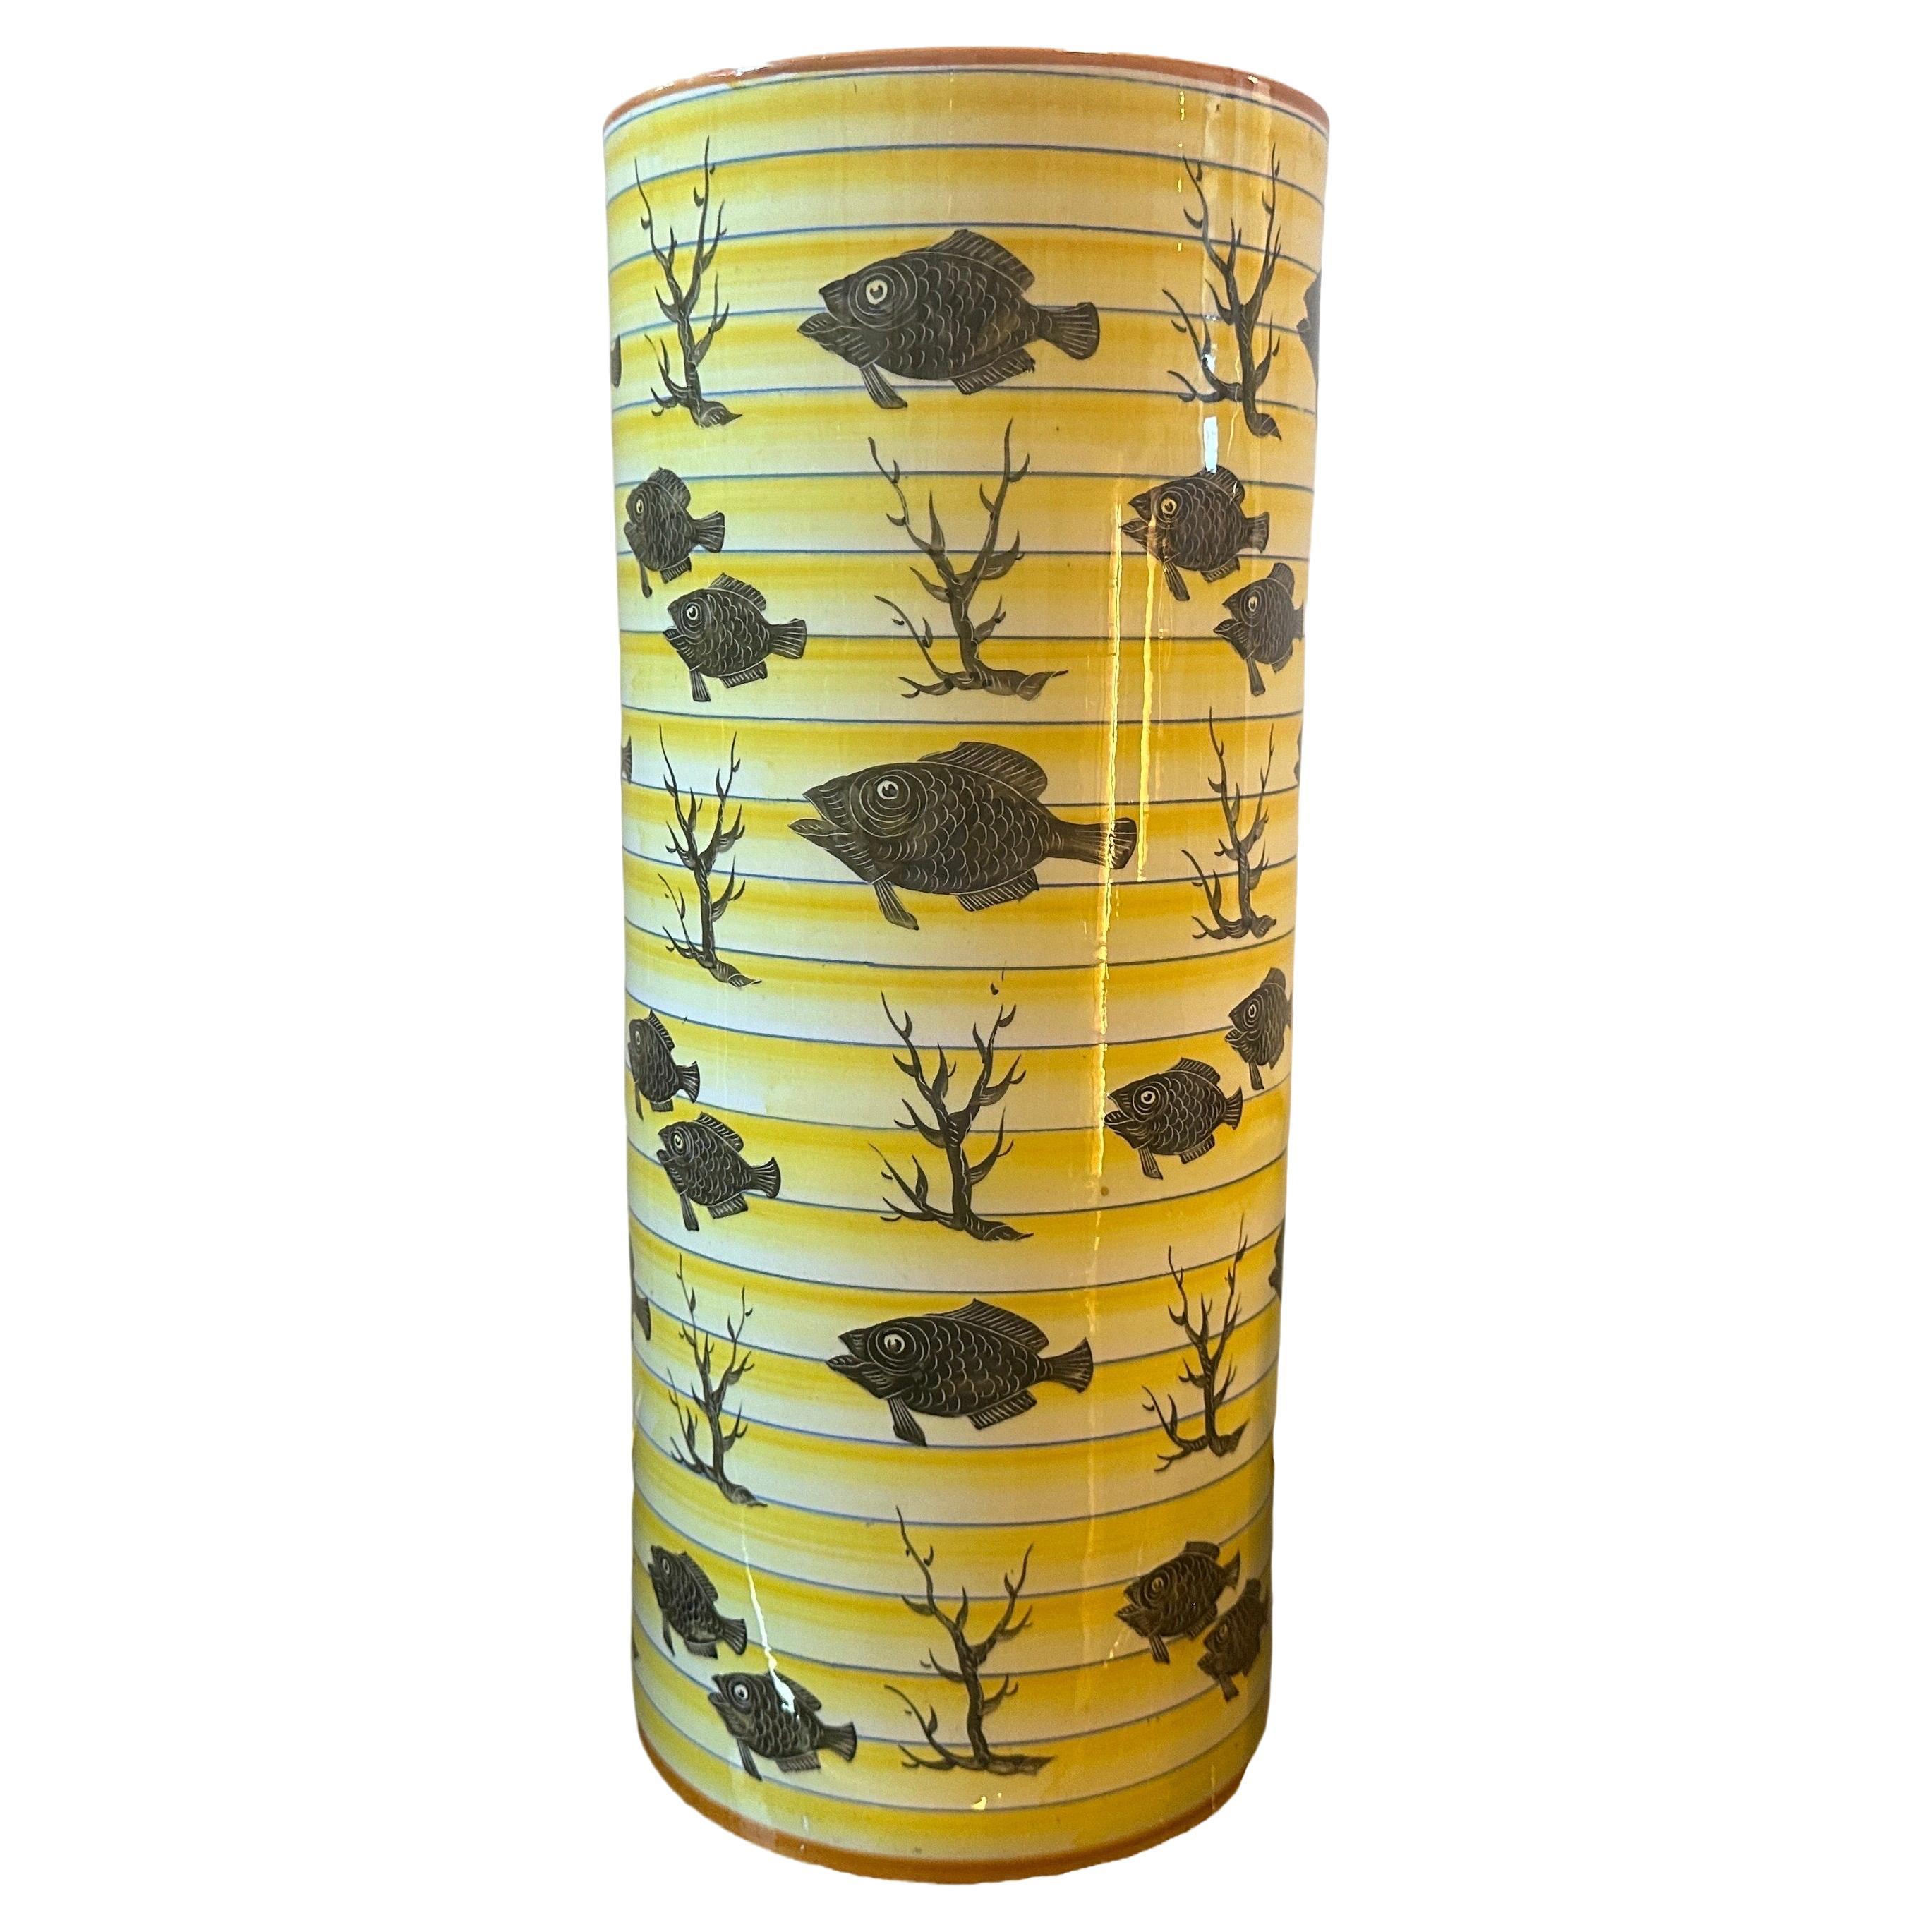 A rare art deco vase also usable for umbrella stand hand-crafted in Sesto fiorentino by A.C.I. it's in good conditions overall and marked on the bottom. The yellow base itìs decorated with black fishes and corals. It's an amazing collector piece